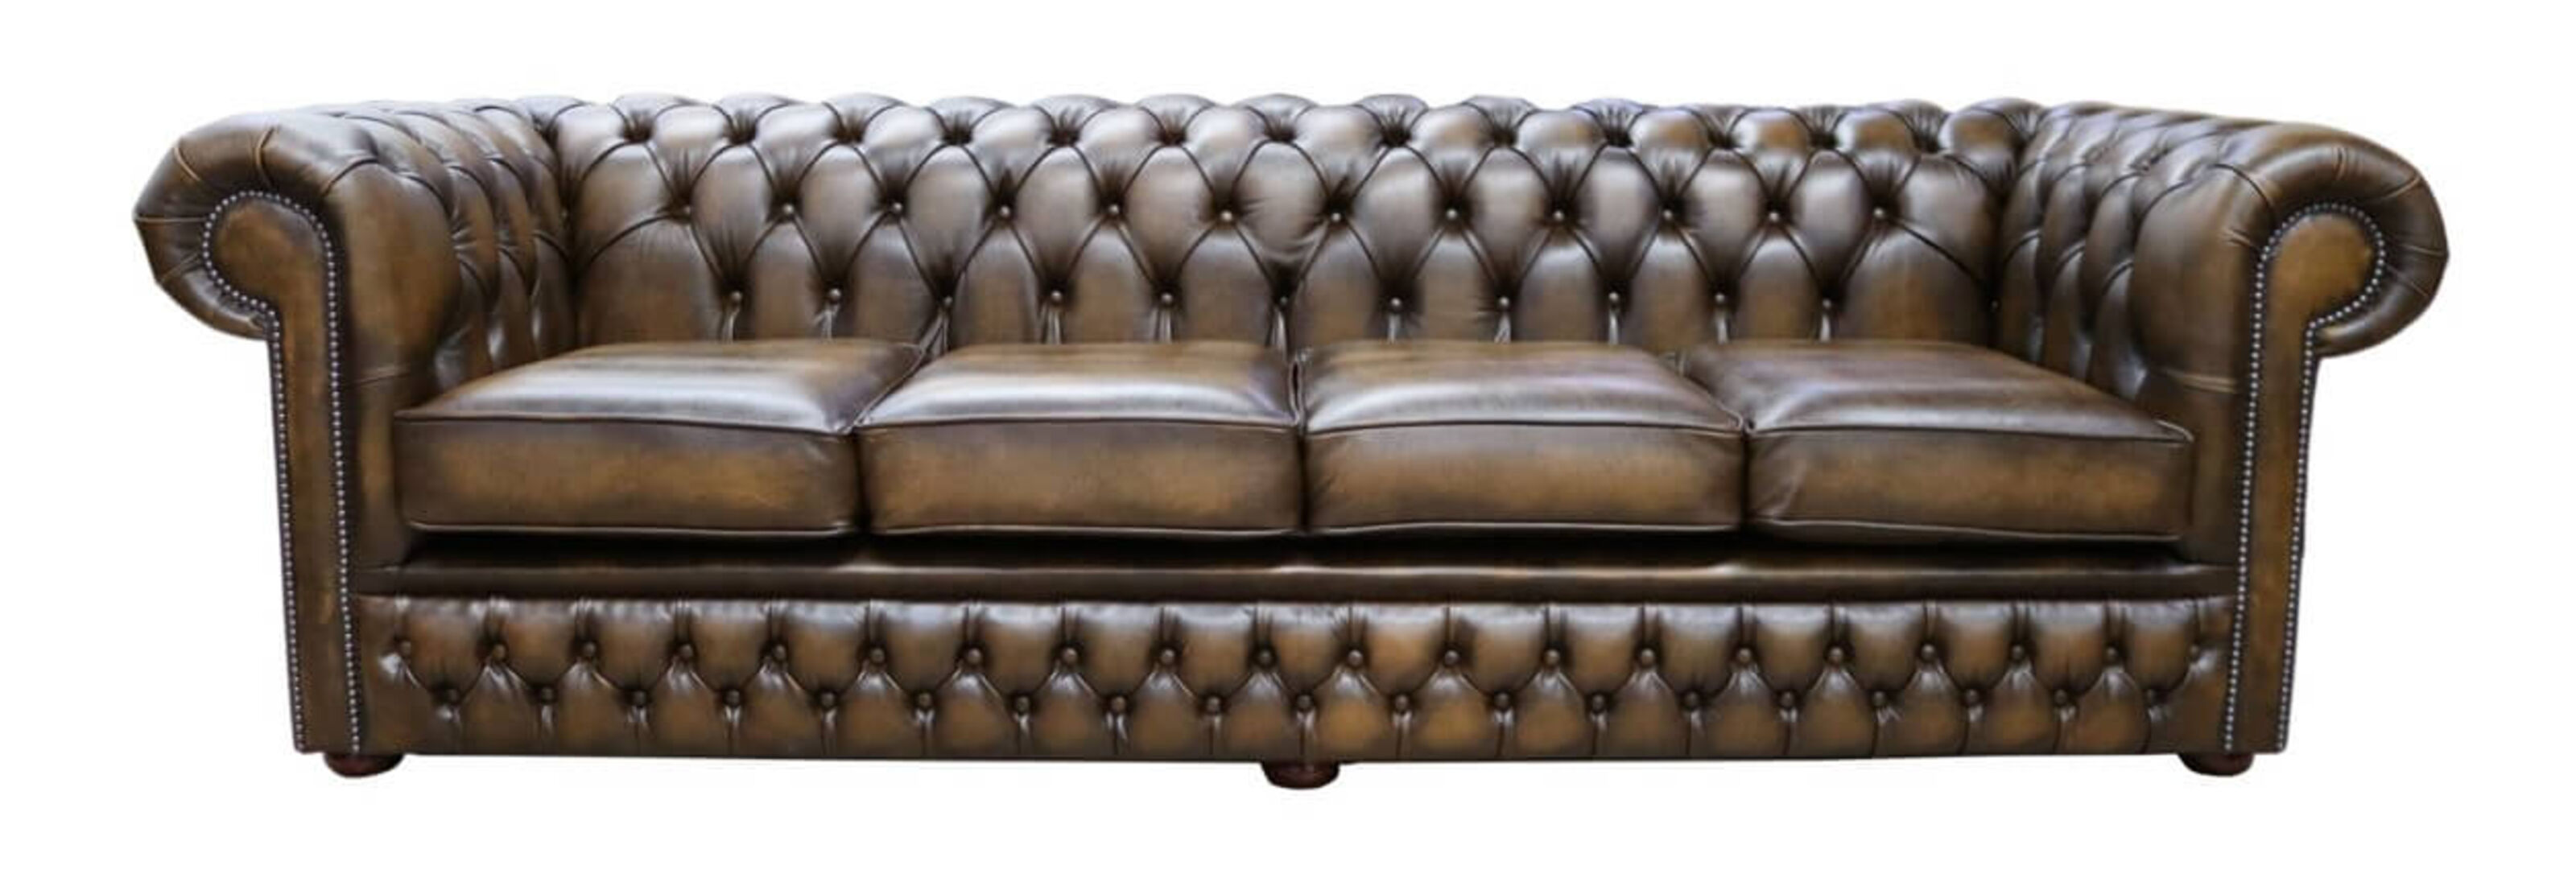 Gold Leather Chesterfield Sofa Uk, Gold Leather Furniture